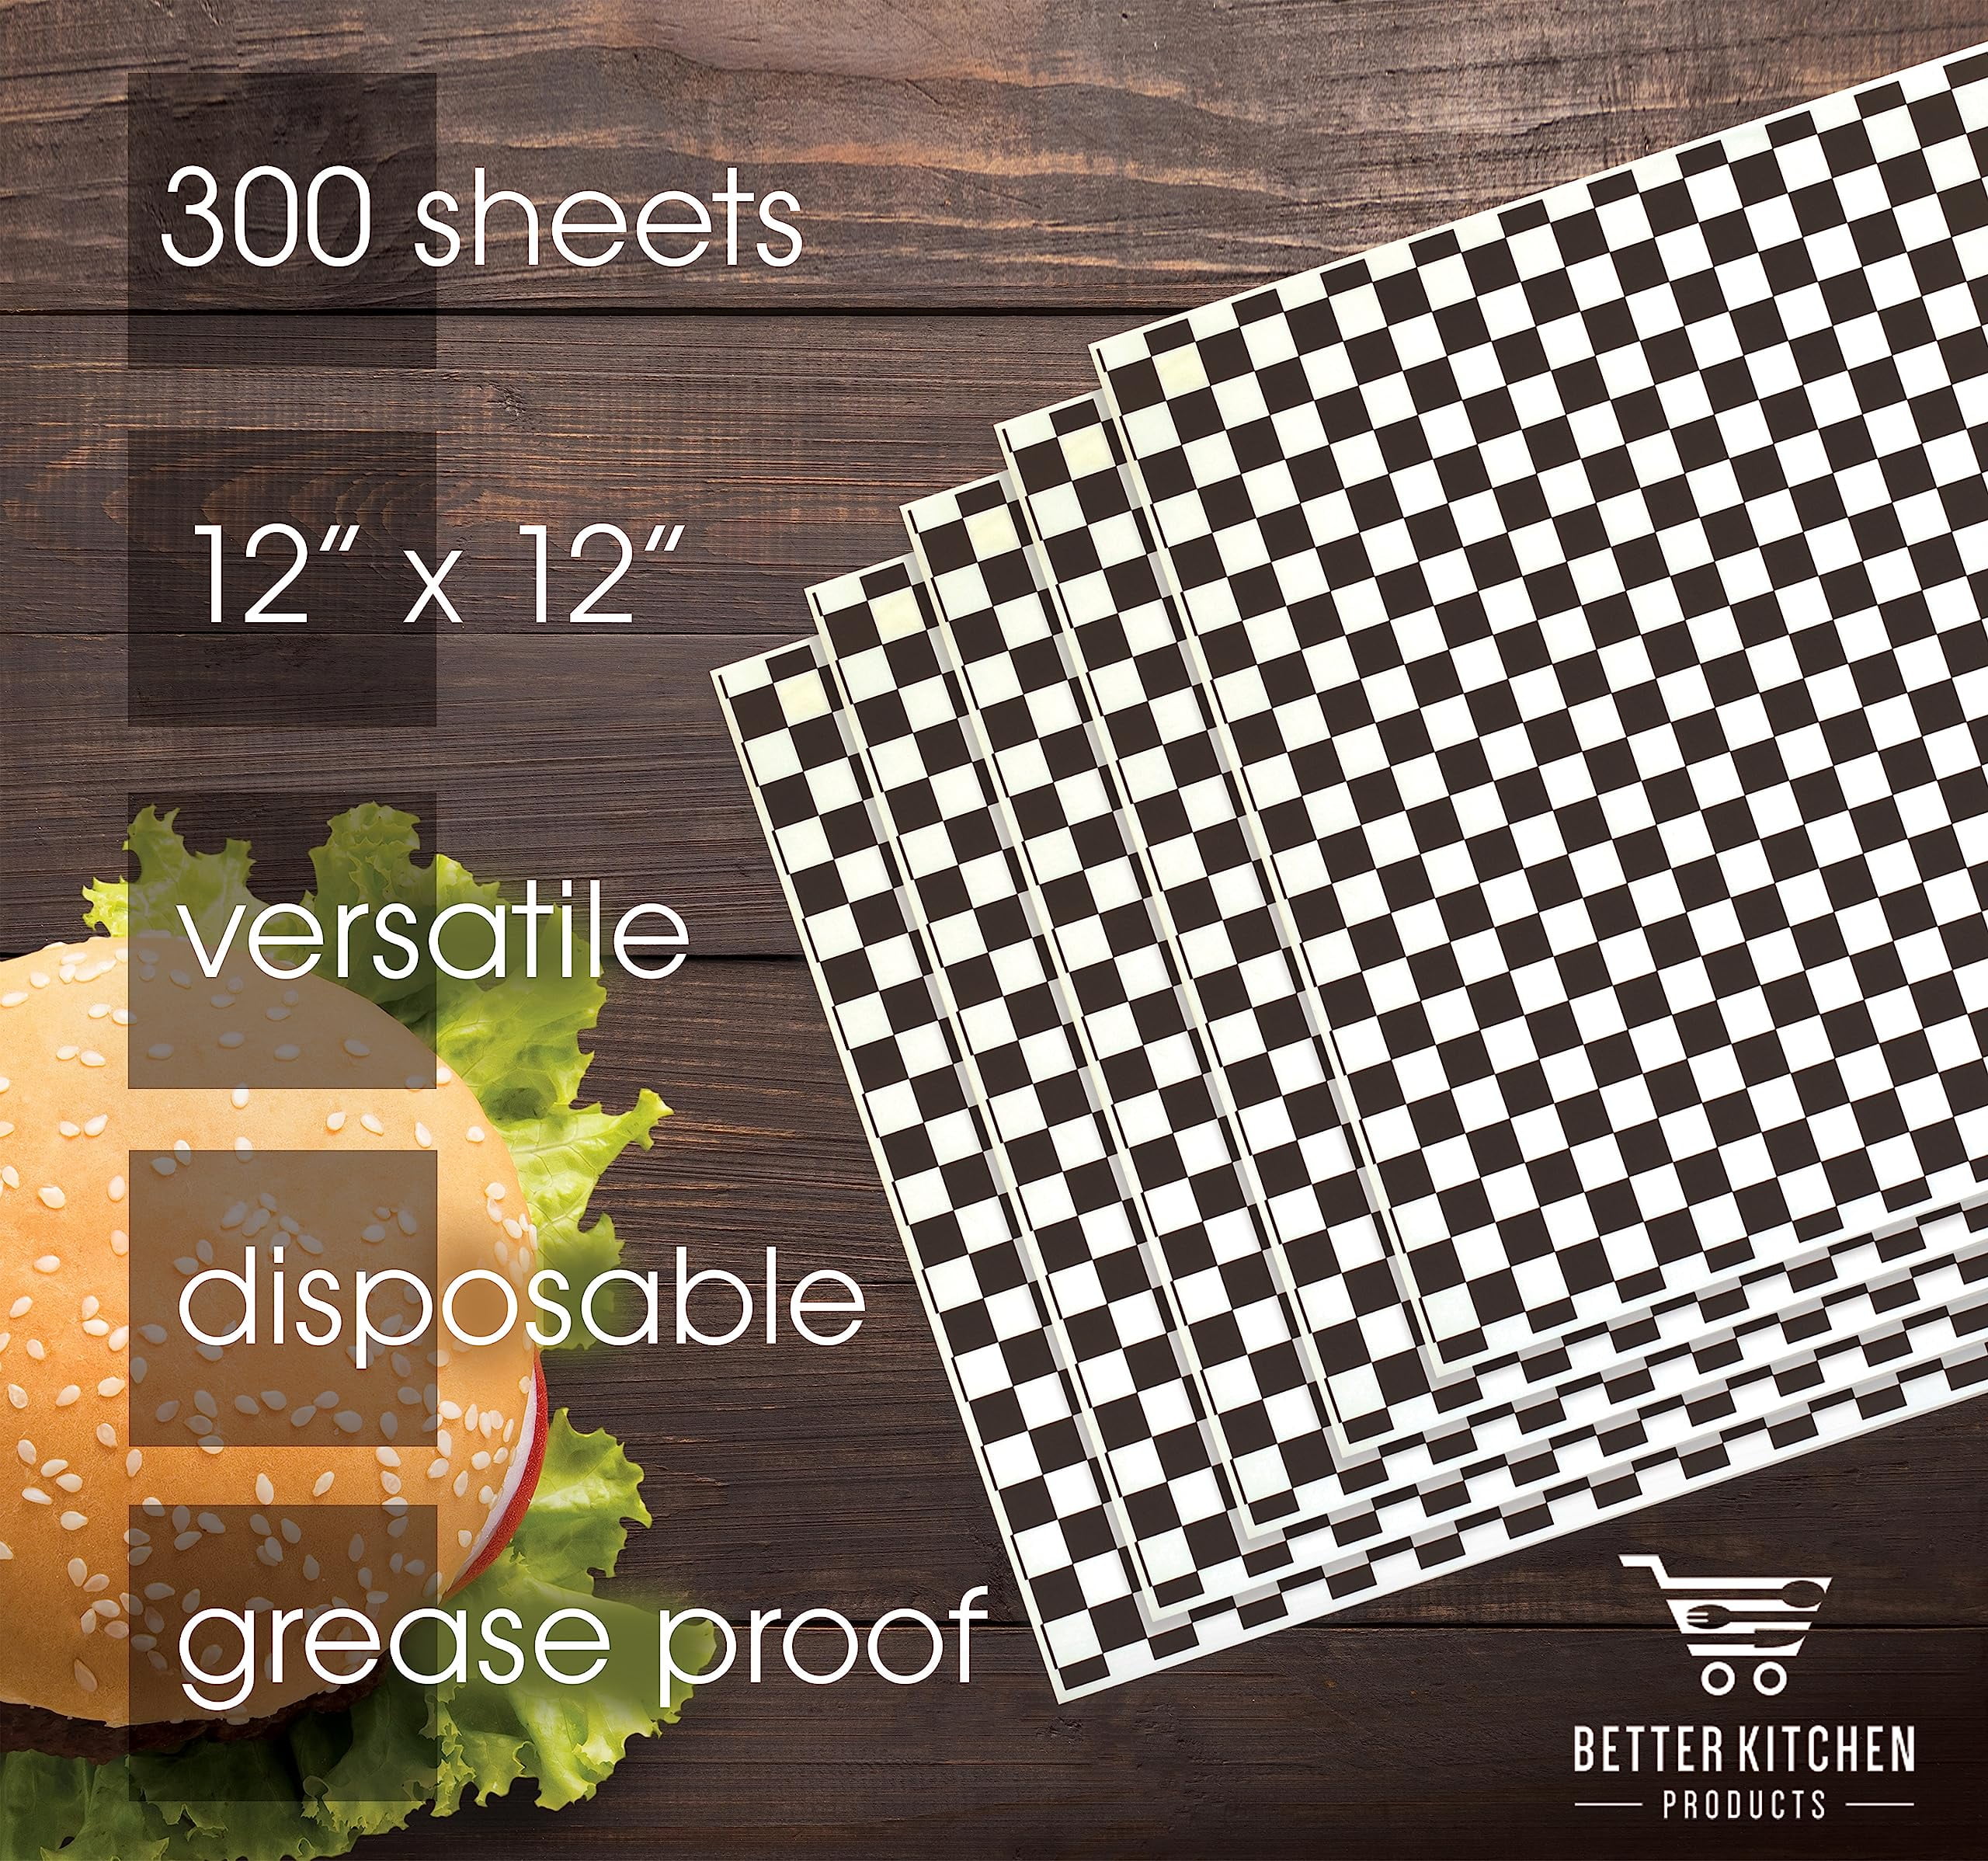 [250 Sheets] 12x12 Deli Paper Sheets, Black and White Checkered Dry Waxed  Paper, Sandwich Wrapping Paper, Grease-Proof Wax Paper for Food Basket